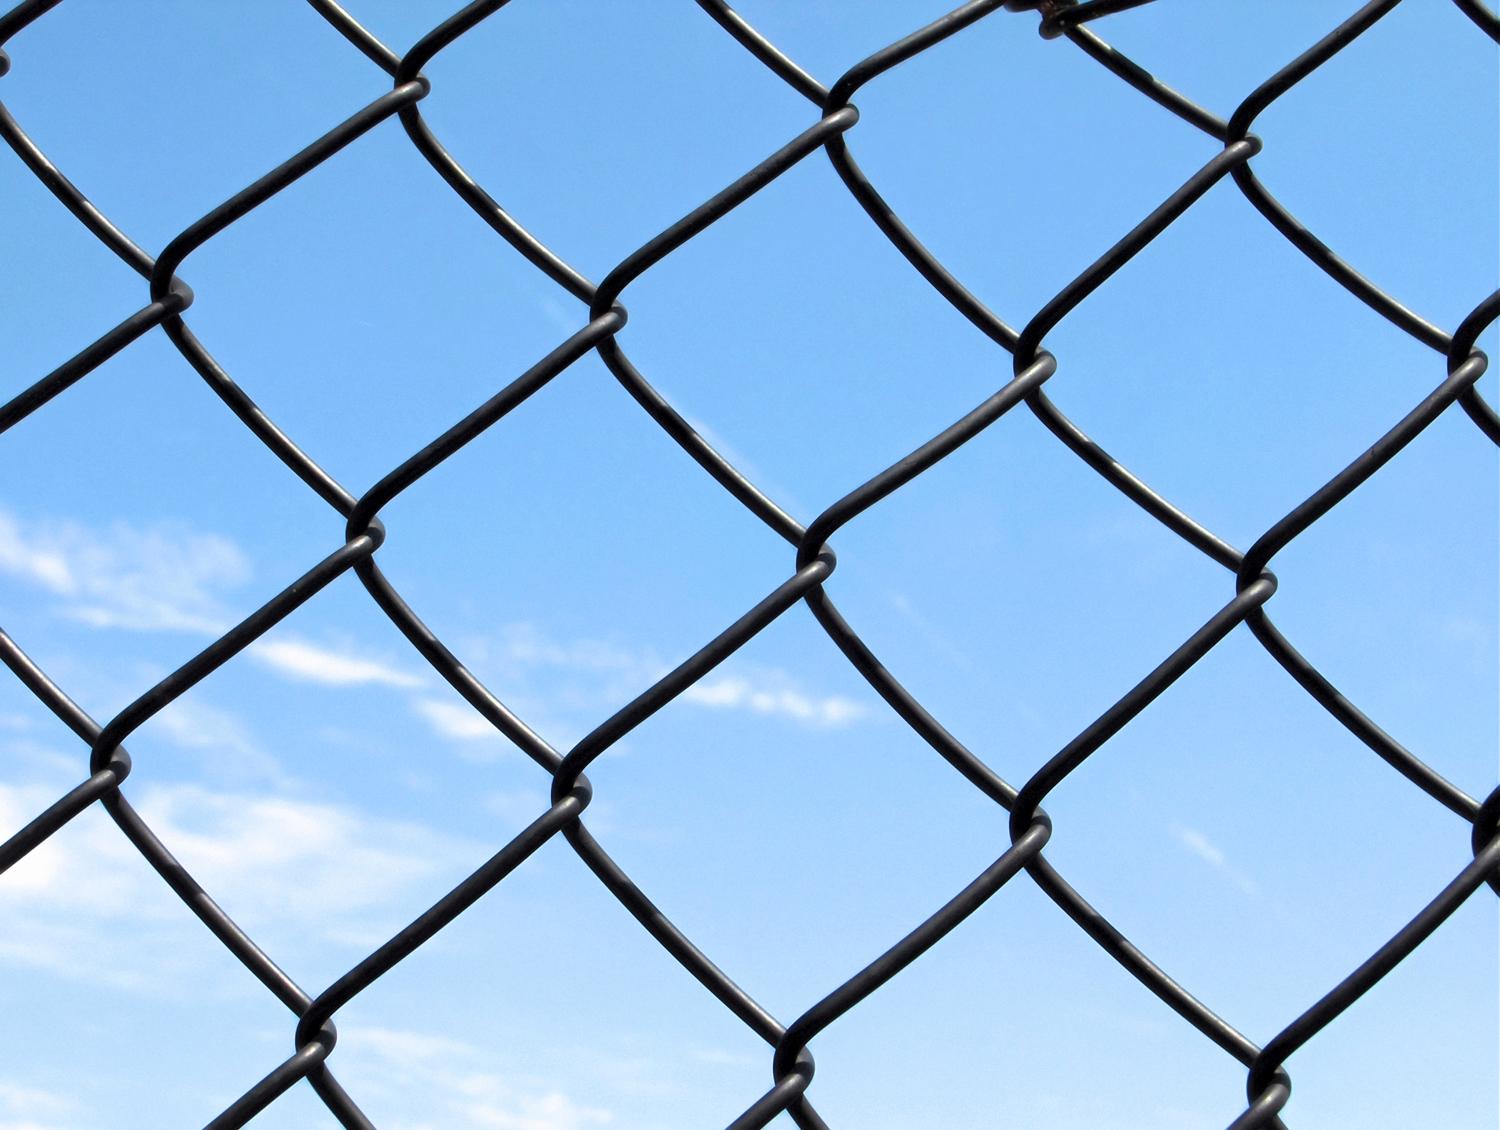 Buy Chain Link Wire Mesh Fence Price,Size,Weight,Model,Width -Okorder.com